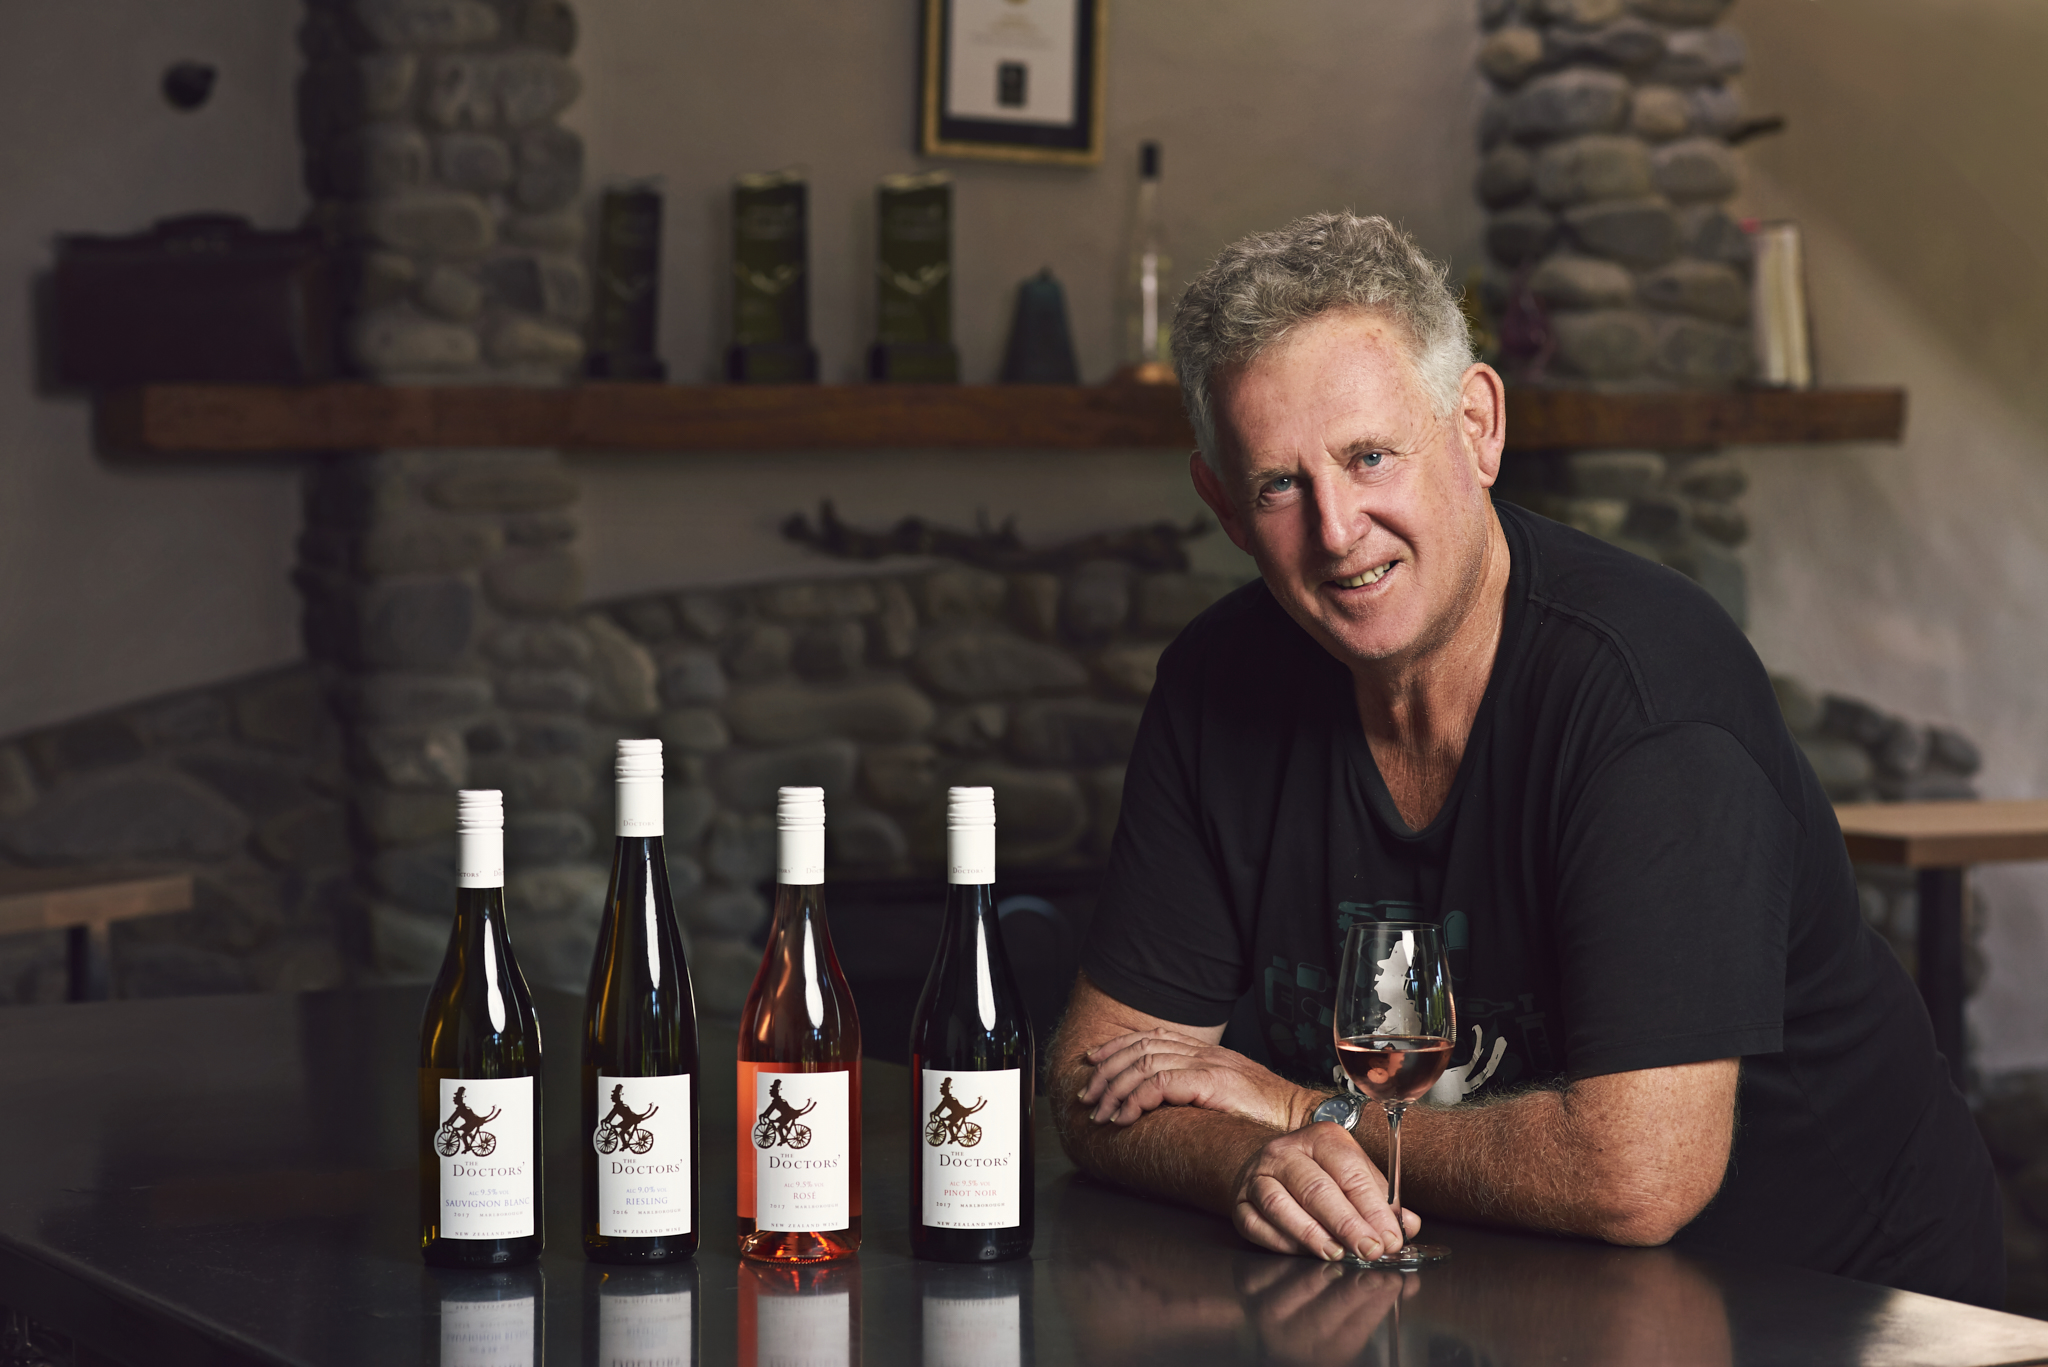 Dr John Forrest with four bottles of his eponymous wines